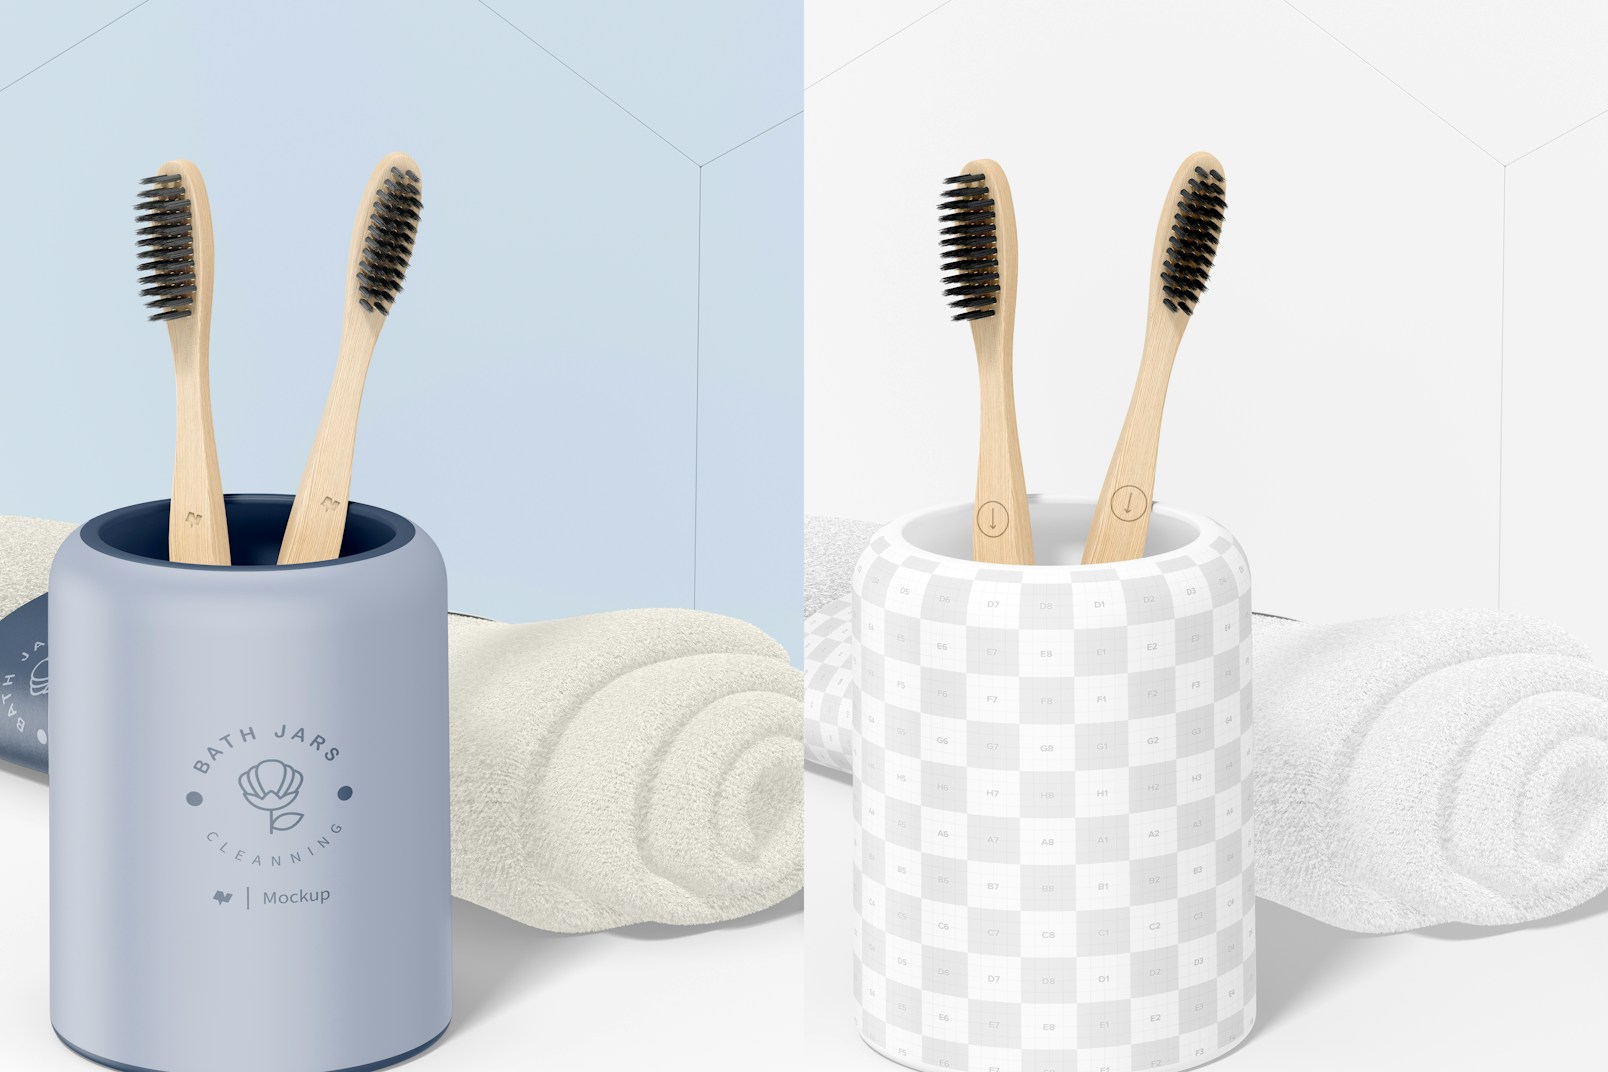 Multipurpose Cup Mockup, with Toothbrushes